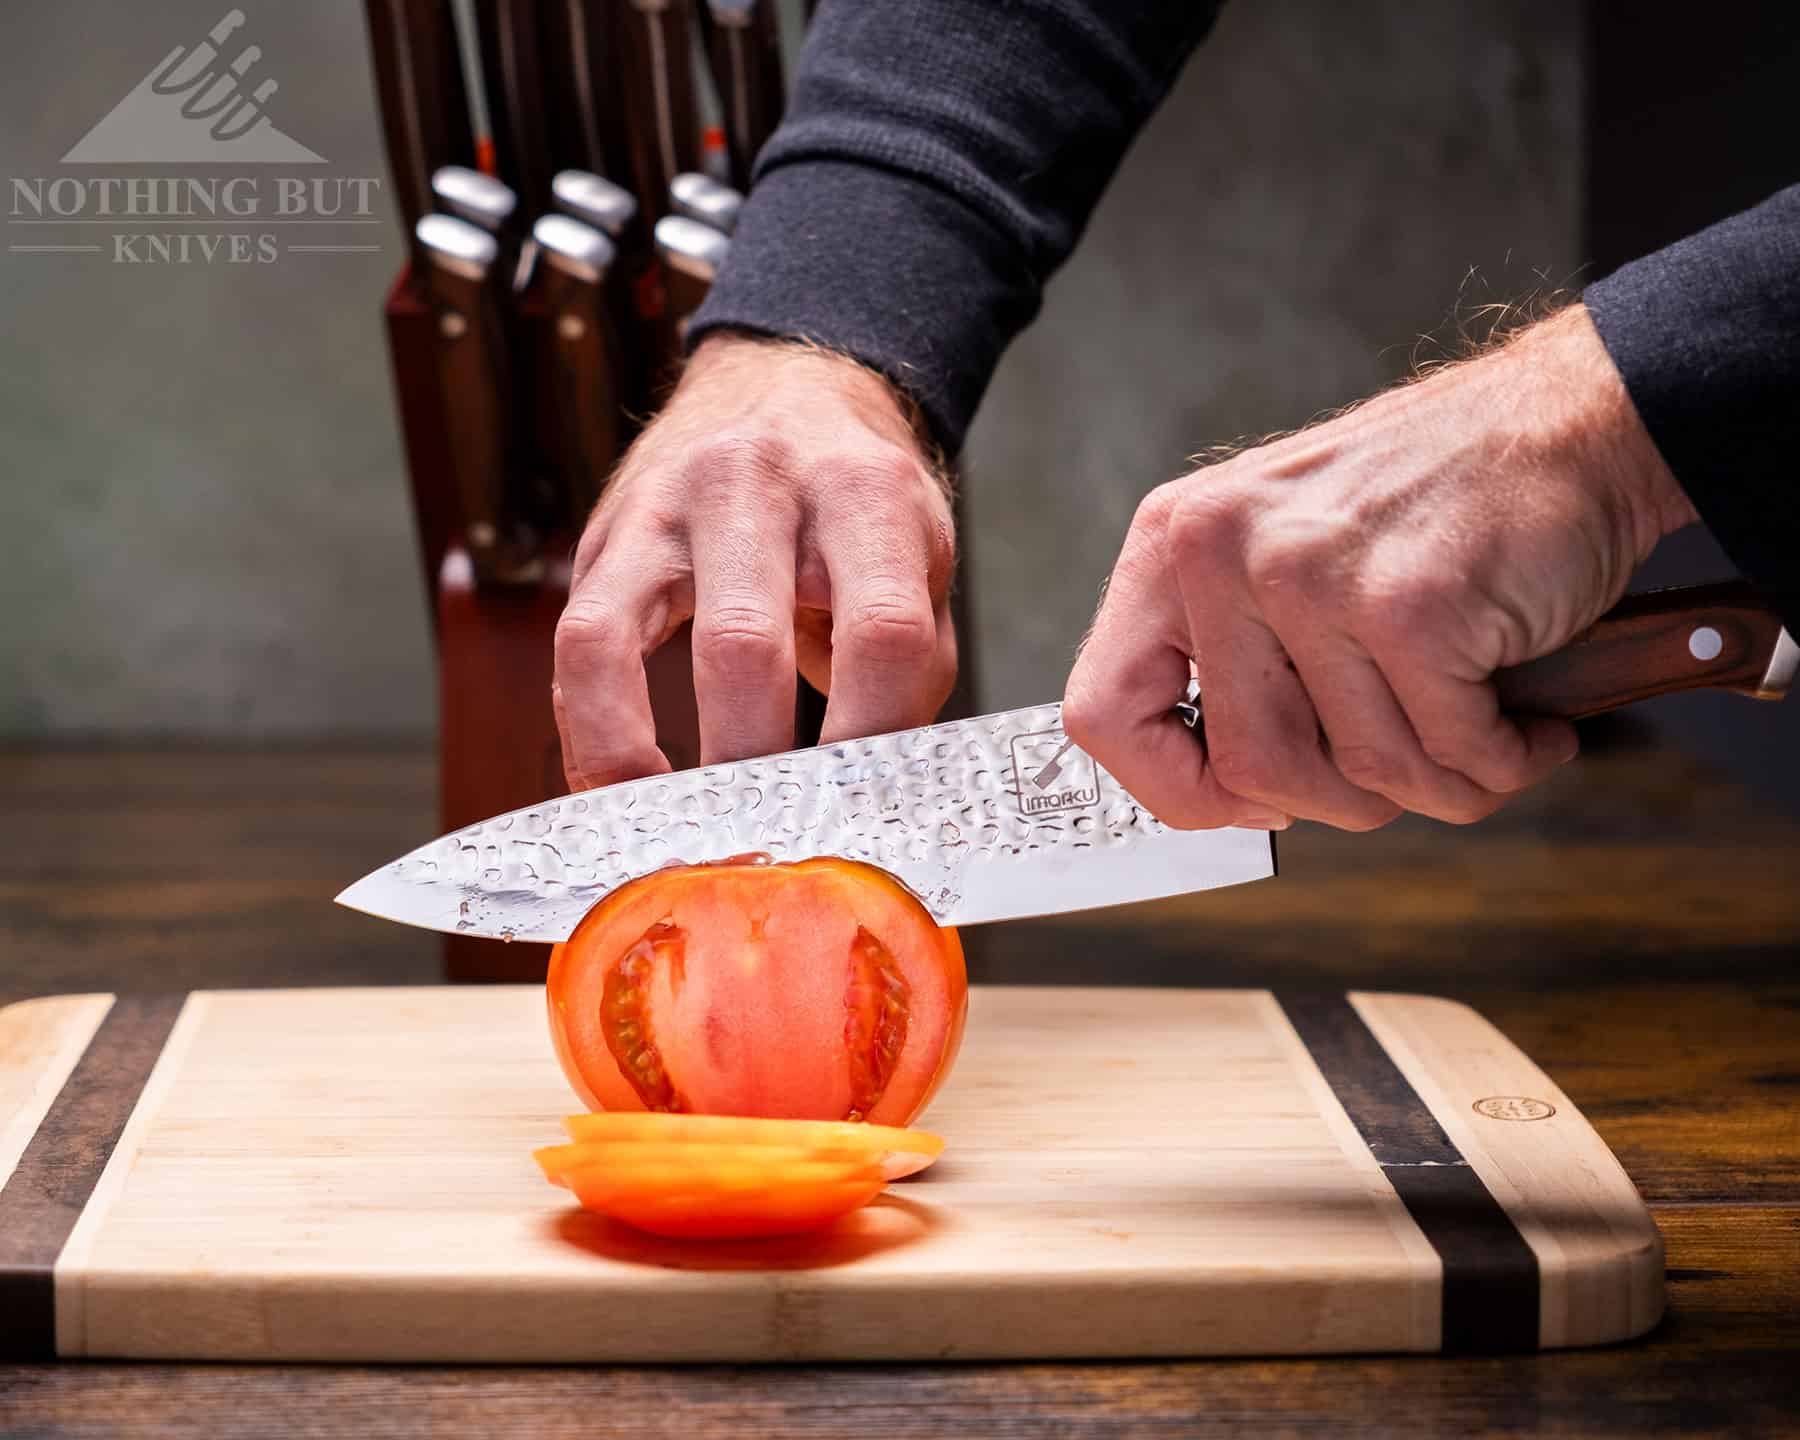 The 8 inch chef knife that ships with this set is a great kitchen workhorse for almost any slicing or dicing task. 